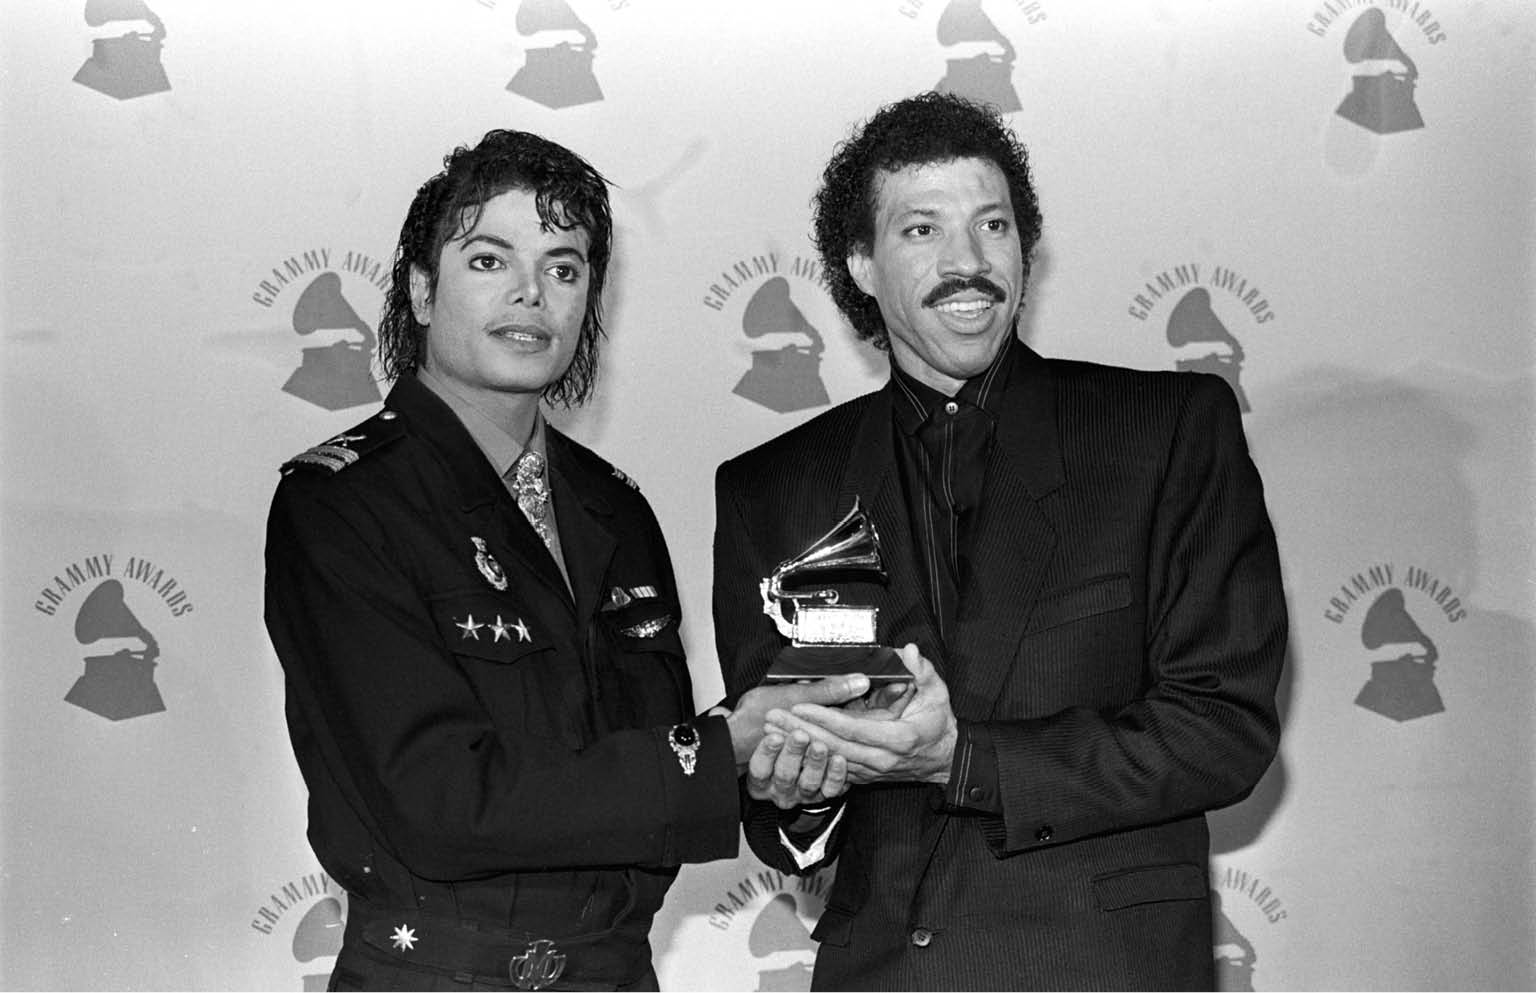 Singer-songwriters Michael Jackson and Lionel Ritchie hold their Grammy Award for "We Are the World"., Image: 15371186, License: Rights-managed, Restrictions: , Model Release: no, Credit line: Profimedia, Corbis